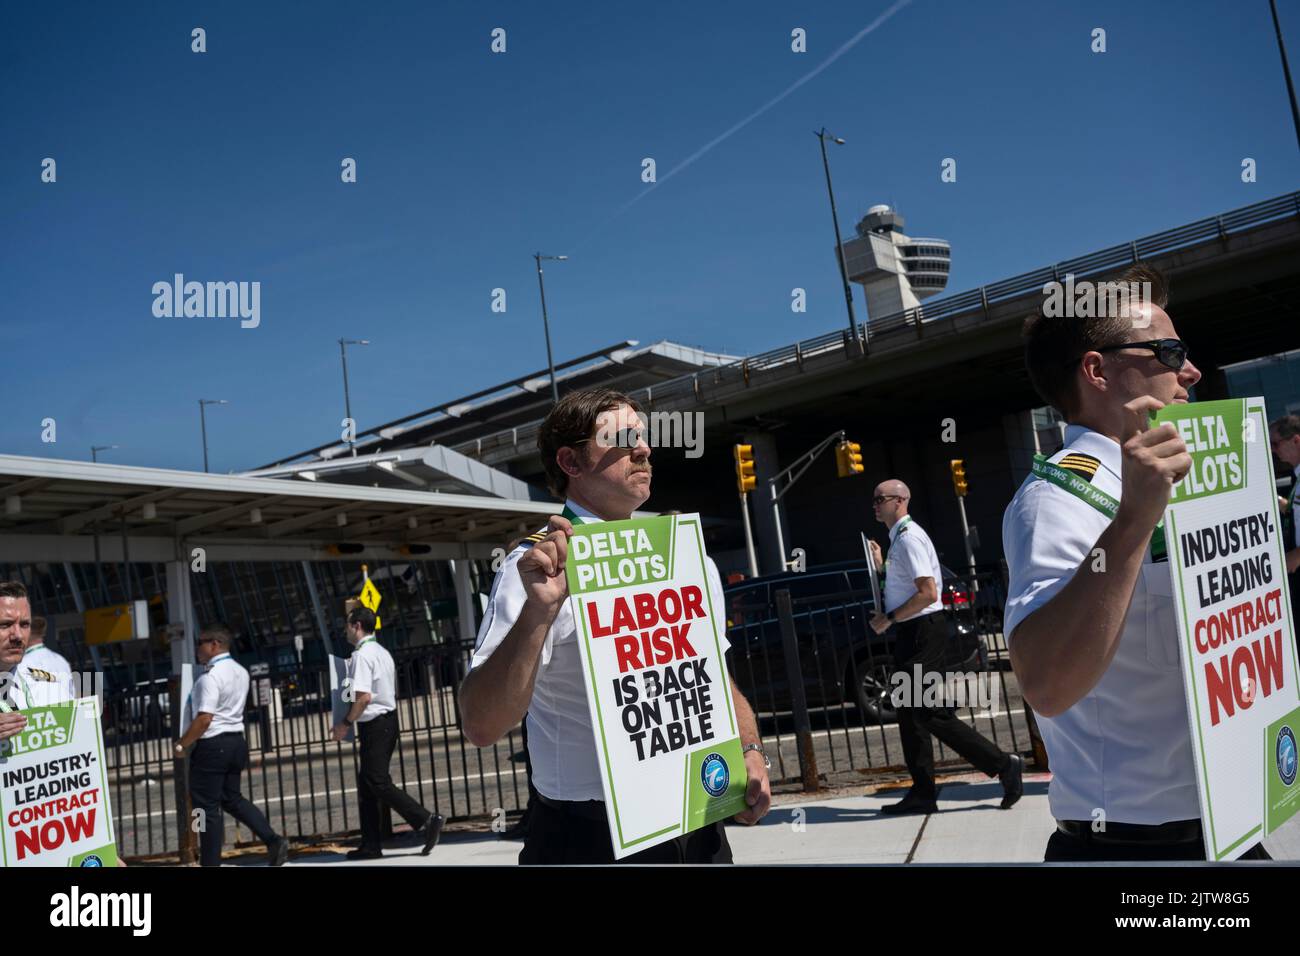 Queens, New York, USA 1st September, 2022 On Thursday before U.S. Labor Day holiday weekend, off-duty Delta Airlines pilots, members of Air Line Pilots Association, picket outside Delta terminal at JFK Airport to protest against lengthy contract negotiations which began in April 2019 and were paused for two years during pandemic, resuming in January of 2022. ALPA says pilots have been flying “historic levels of overtime” due to return of travel demand and said it was picketing at at least one dozen U.S. airports. Stock Photo